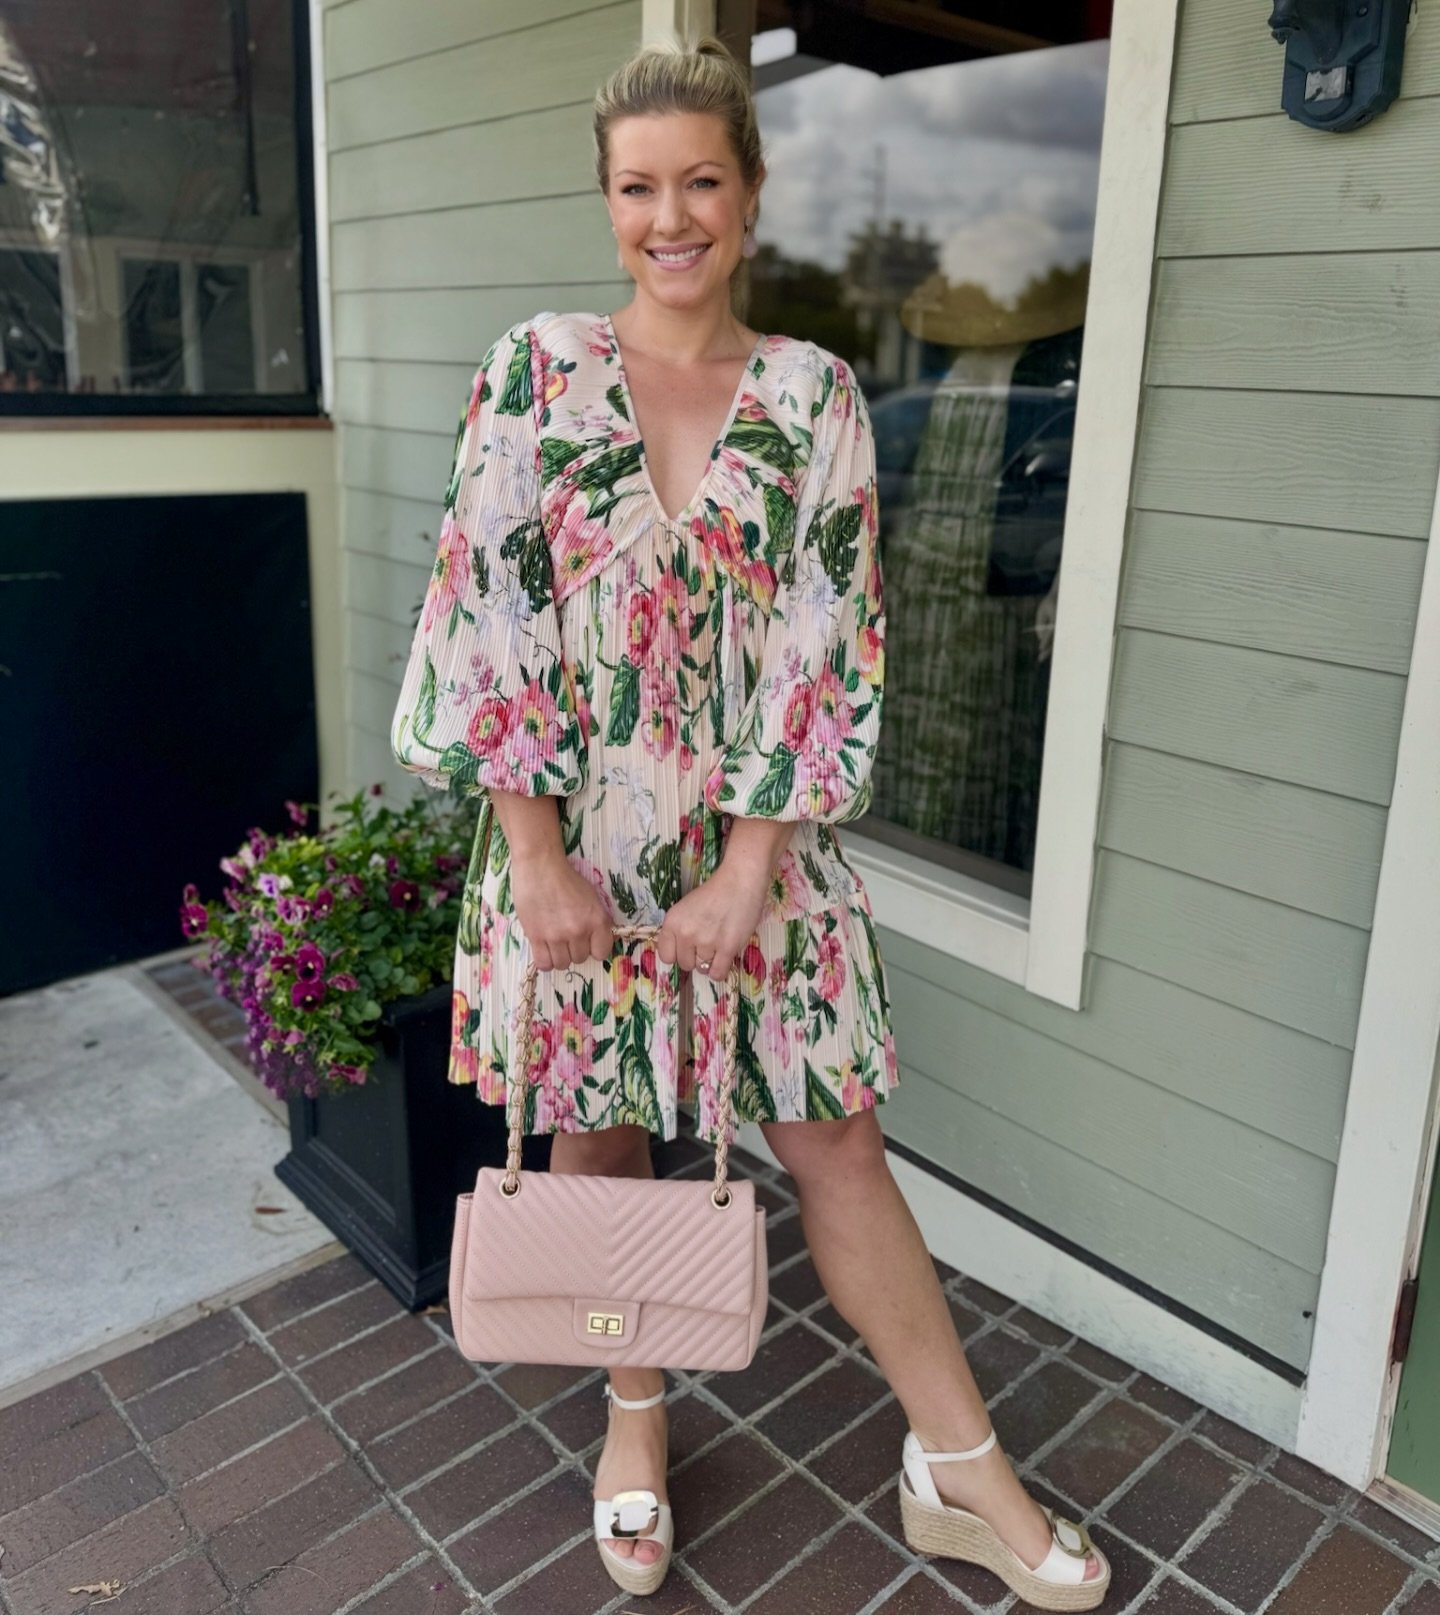 Mother&rsquo;s Day brunch is righttttt around the corner 😉 👏🏼look your best in CW dresses! Come shop! 

👉🏼Head to our stories for details! Call for availability! 

#consigningwomen #consign #cw #consignment #looks #shop #shopping #springlooks #s